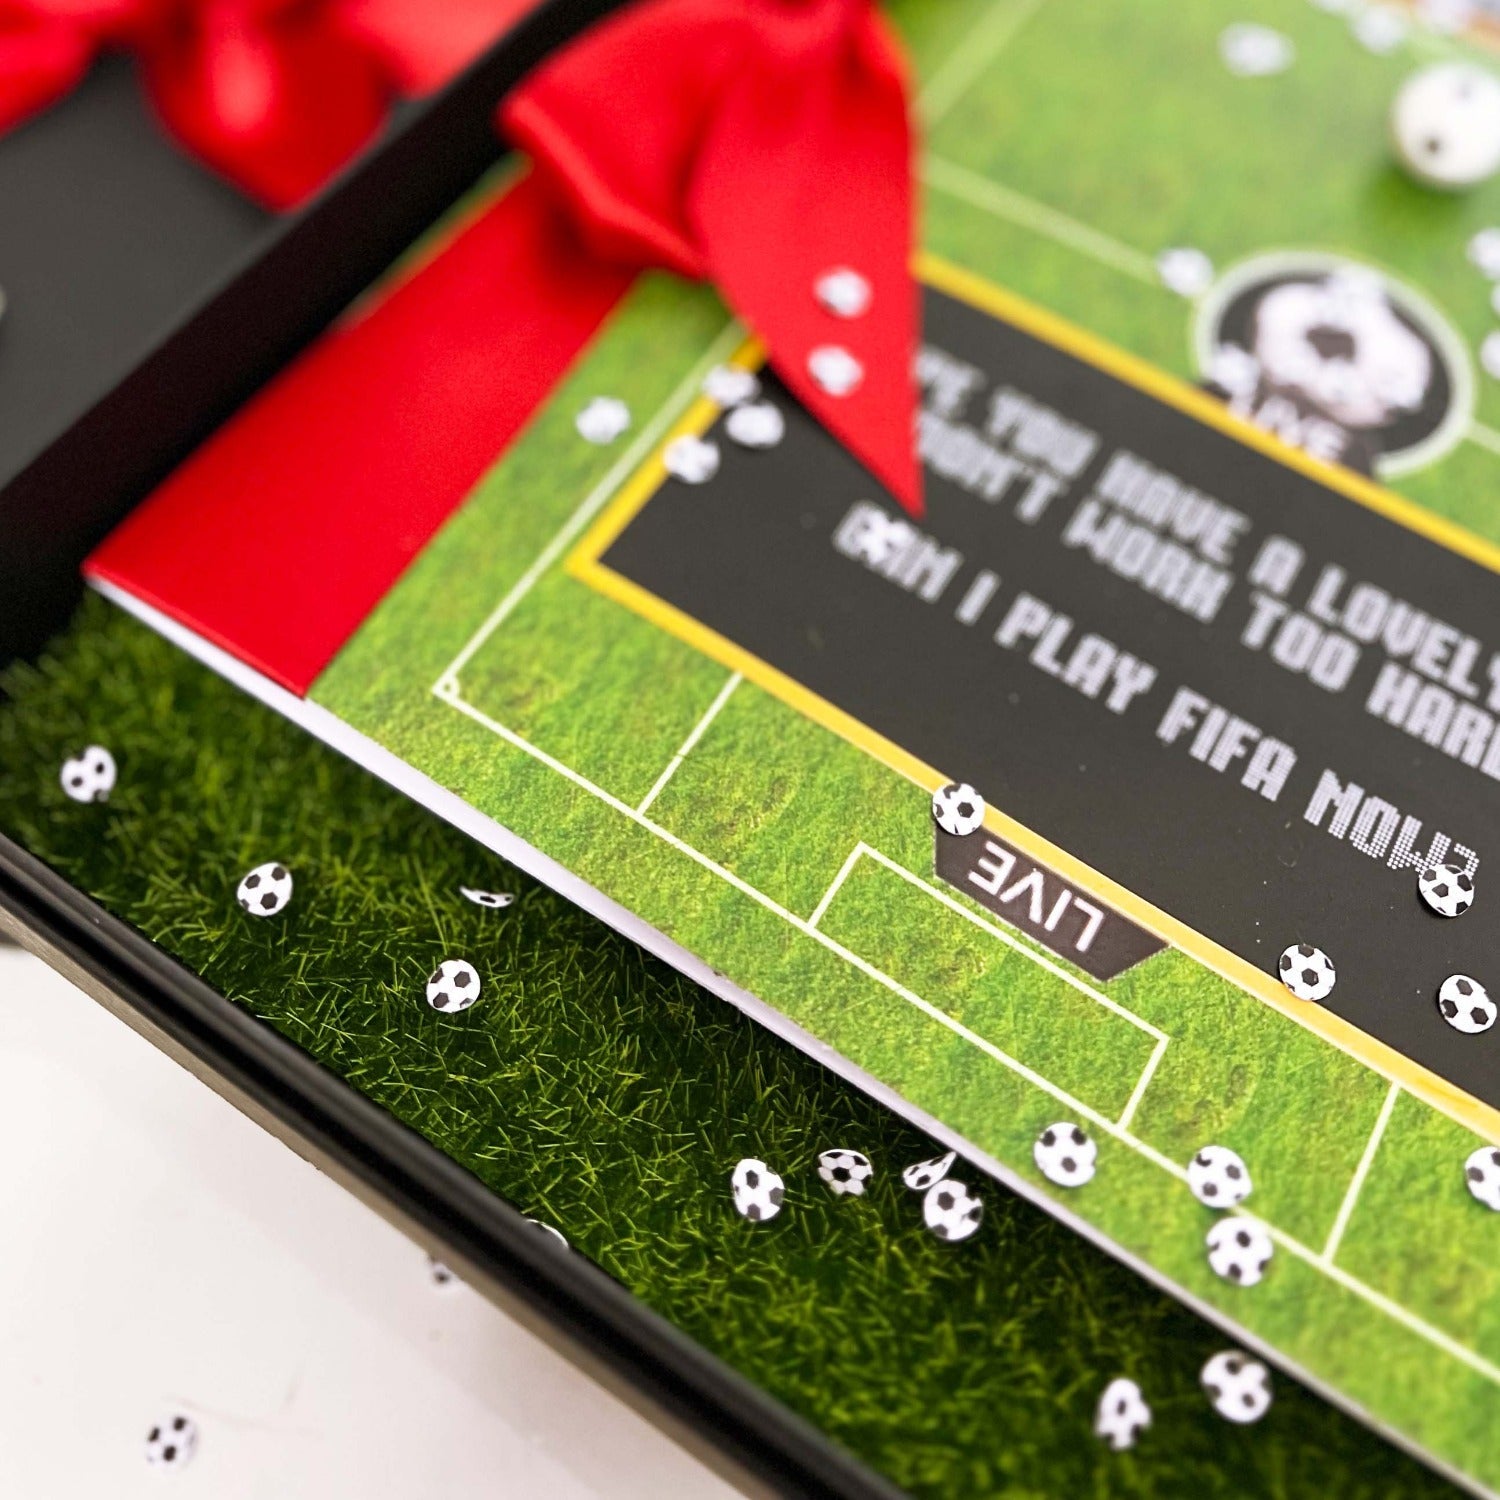 Football Mad Brother Birthday Card Design the ultimate birthday card for the ultimate football fan